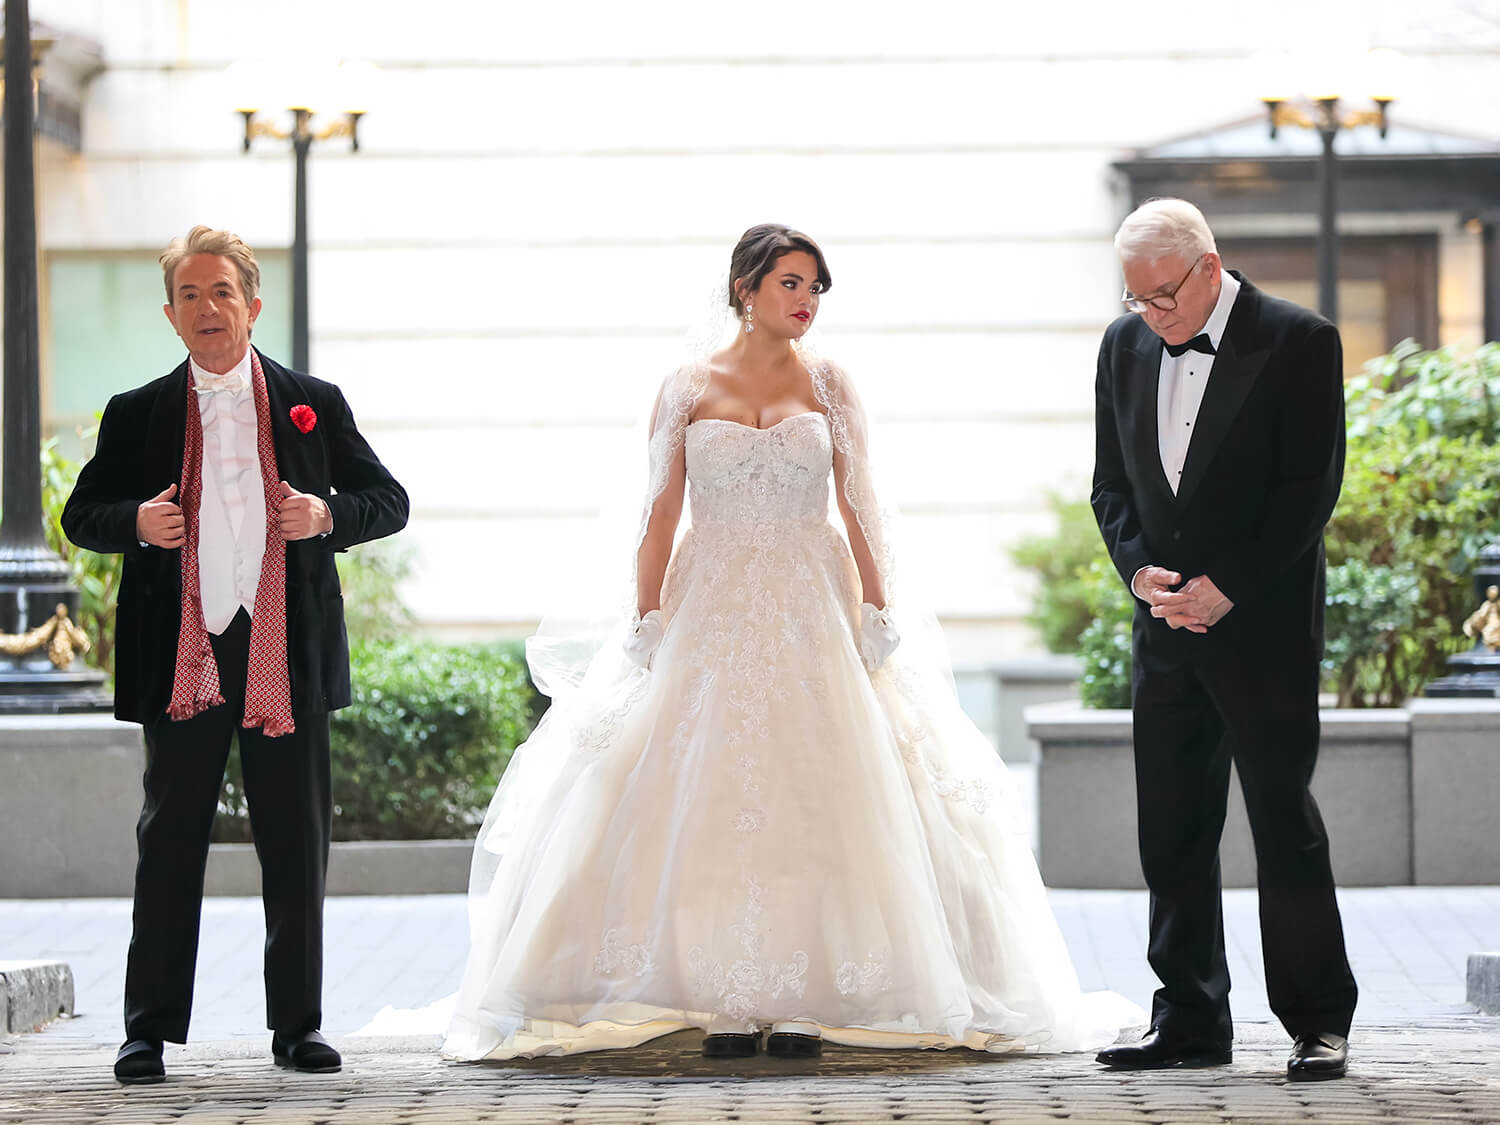 Martin Short, Selena Gomez, and Steve Martin in tuxedos and a wedding dress while filming Only Murders in the Building Season 3.